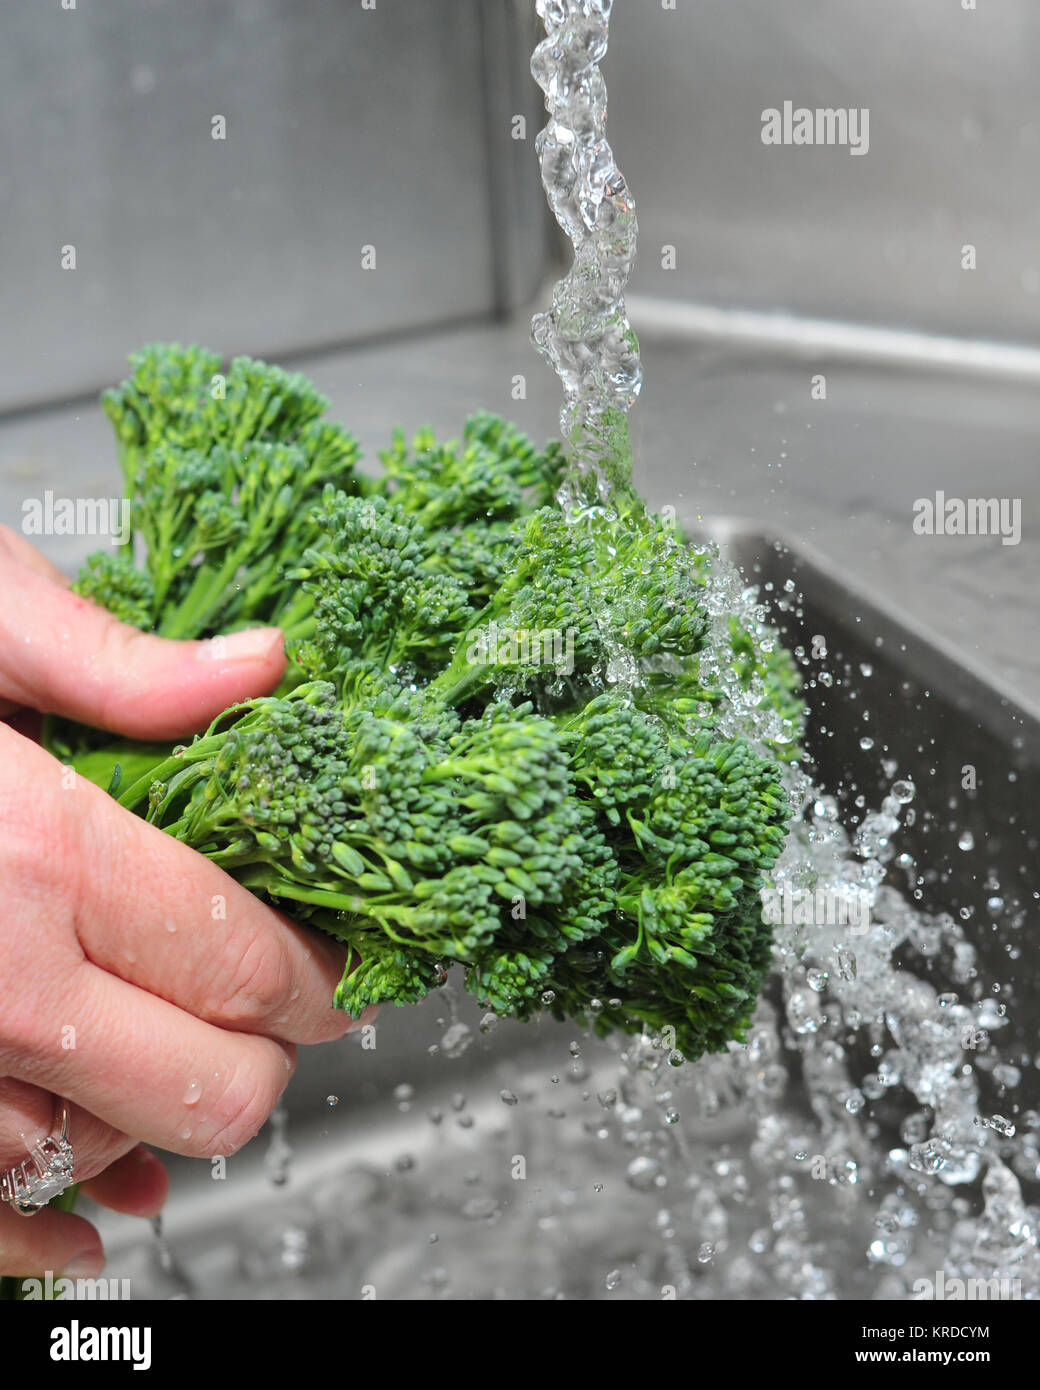 Broccolini being rinsed Stock Photo